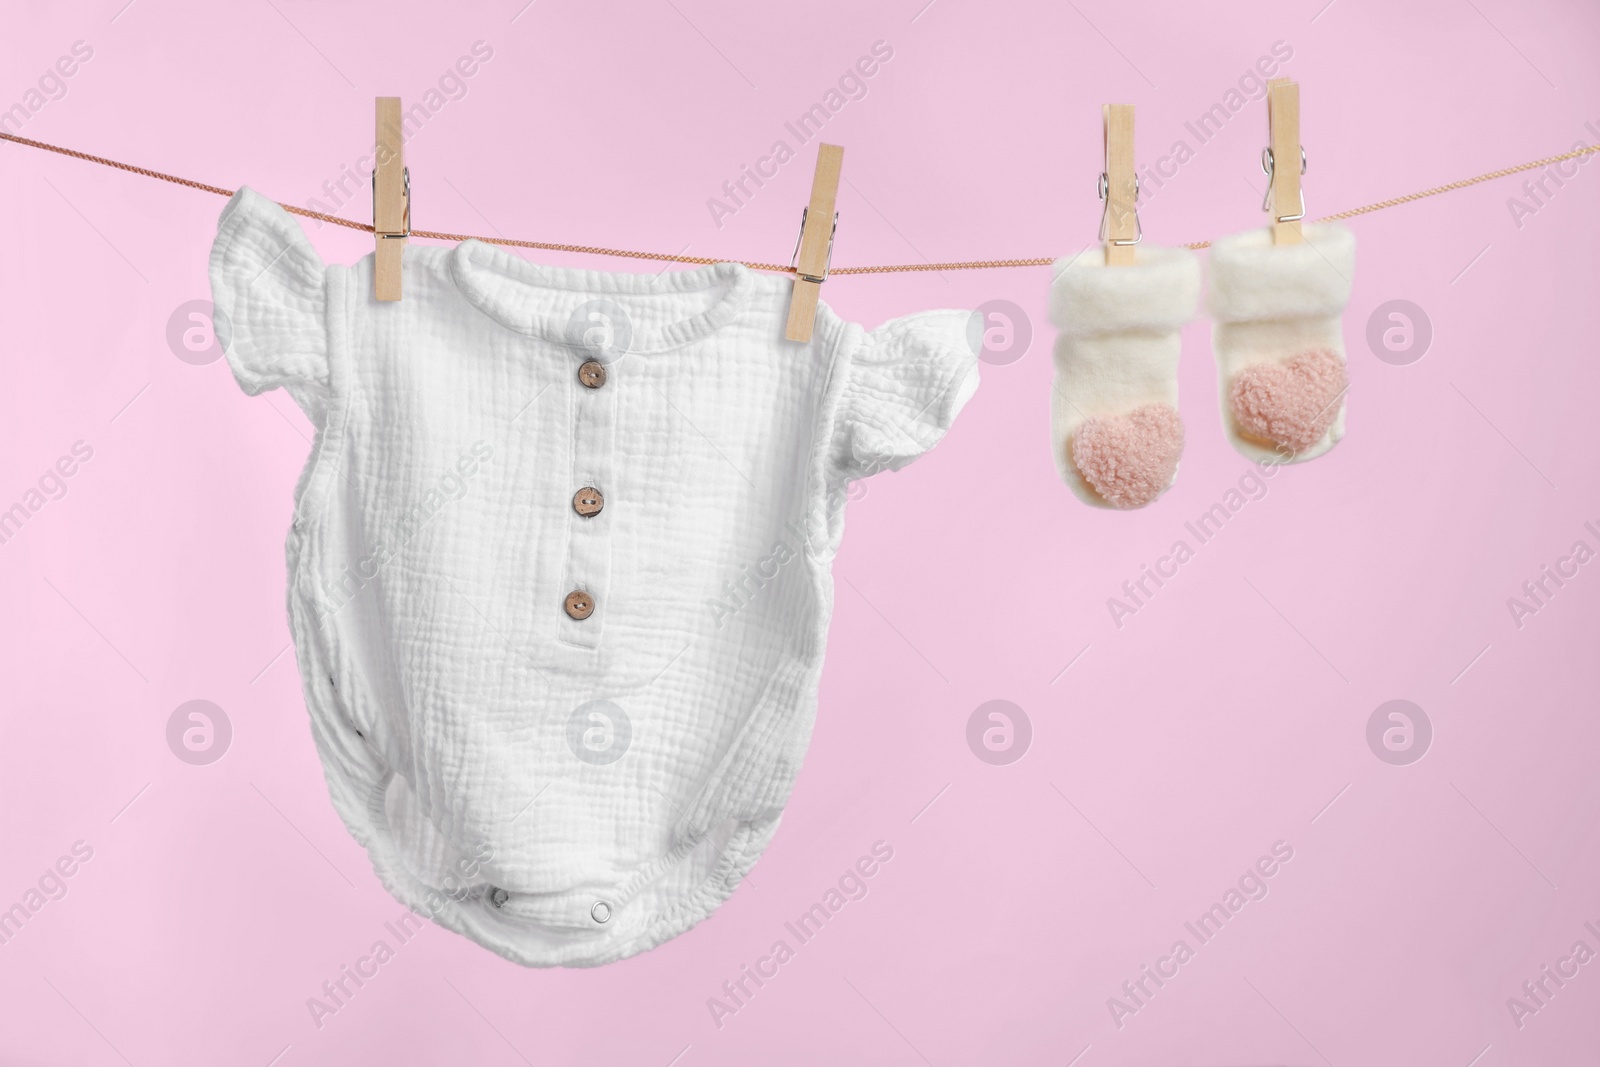 Photo of Cute baby onesie and socks drying on washing line against pink background